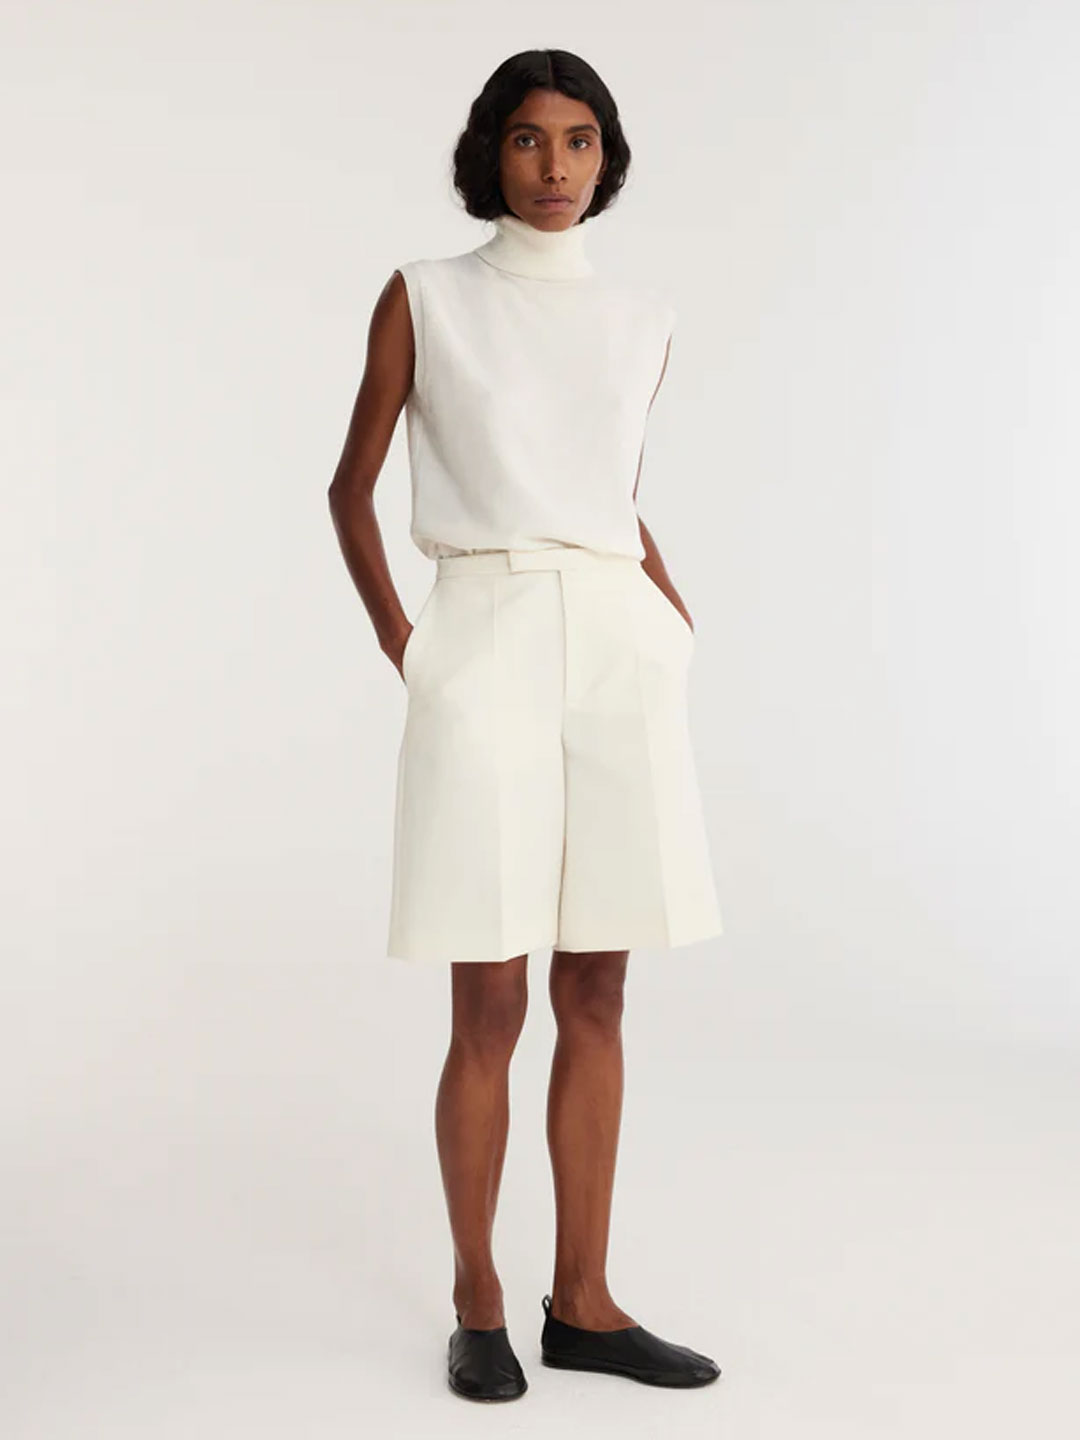 Tailored Wool Shorts - Ivory